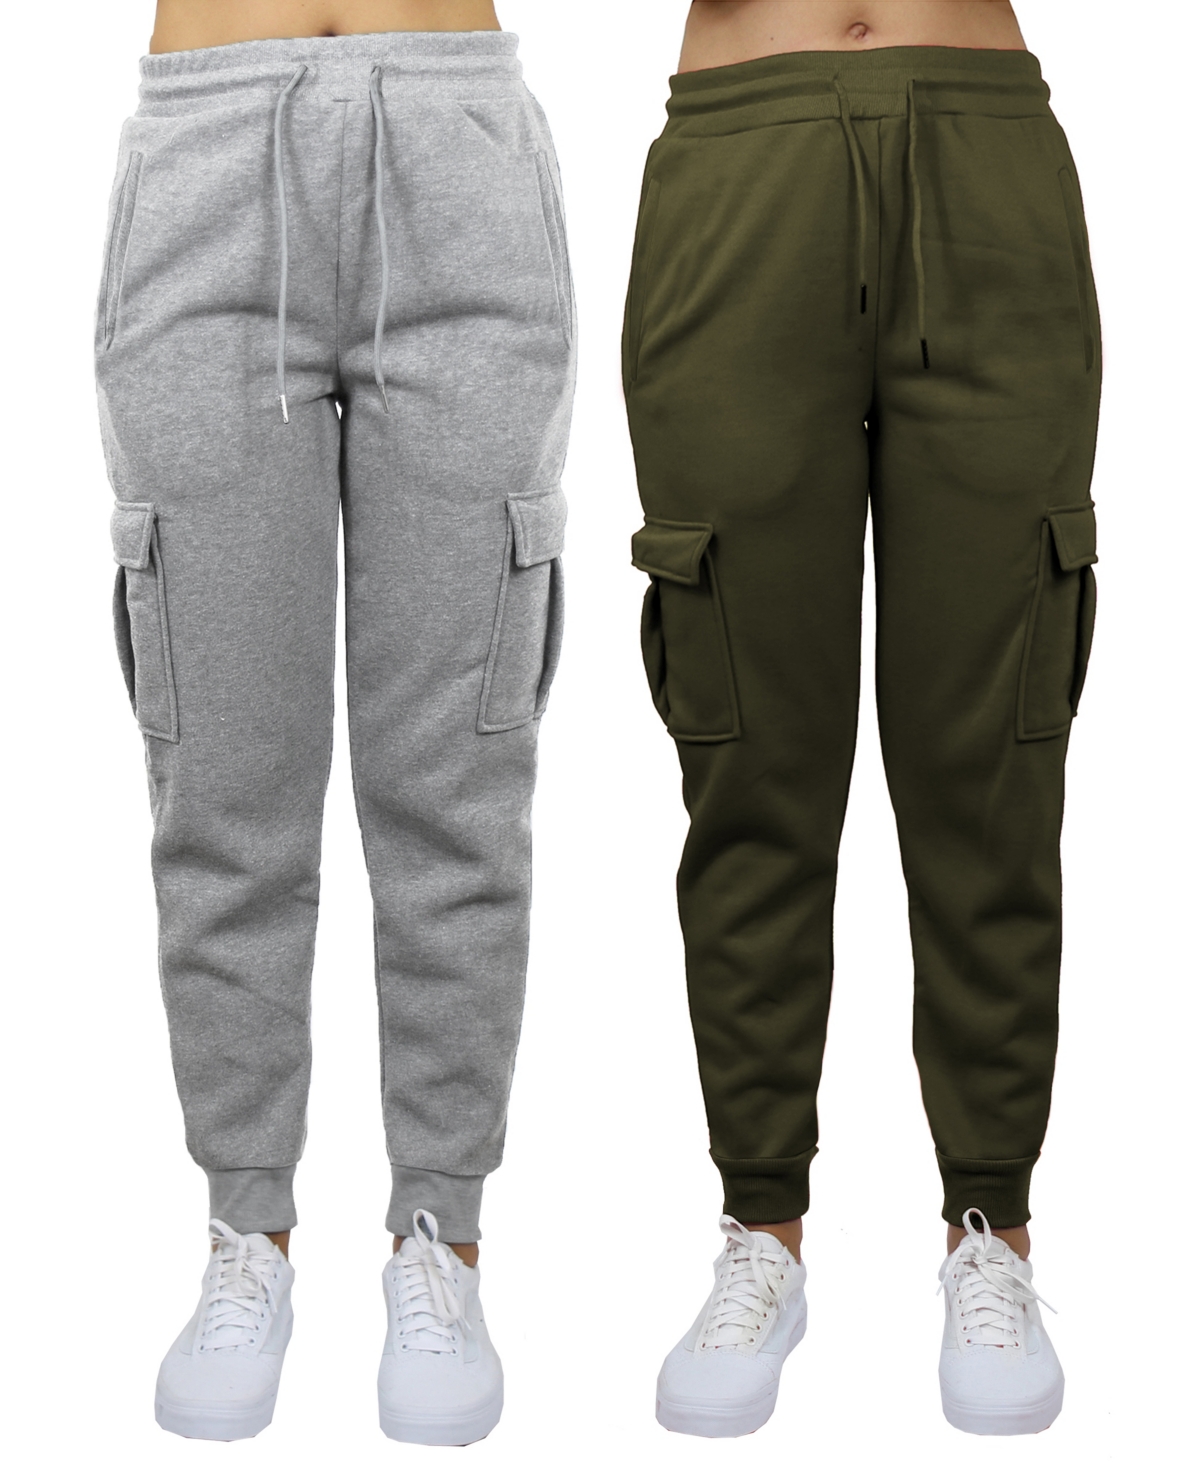 Shop Galaxy By Harvic Women's Heavyweight Loose Fit Fleece Lined Cargo Jogger Pants Set, 2 Pack In Heather Gray,olive